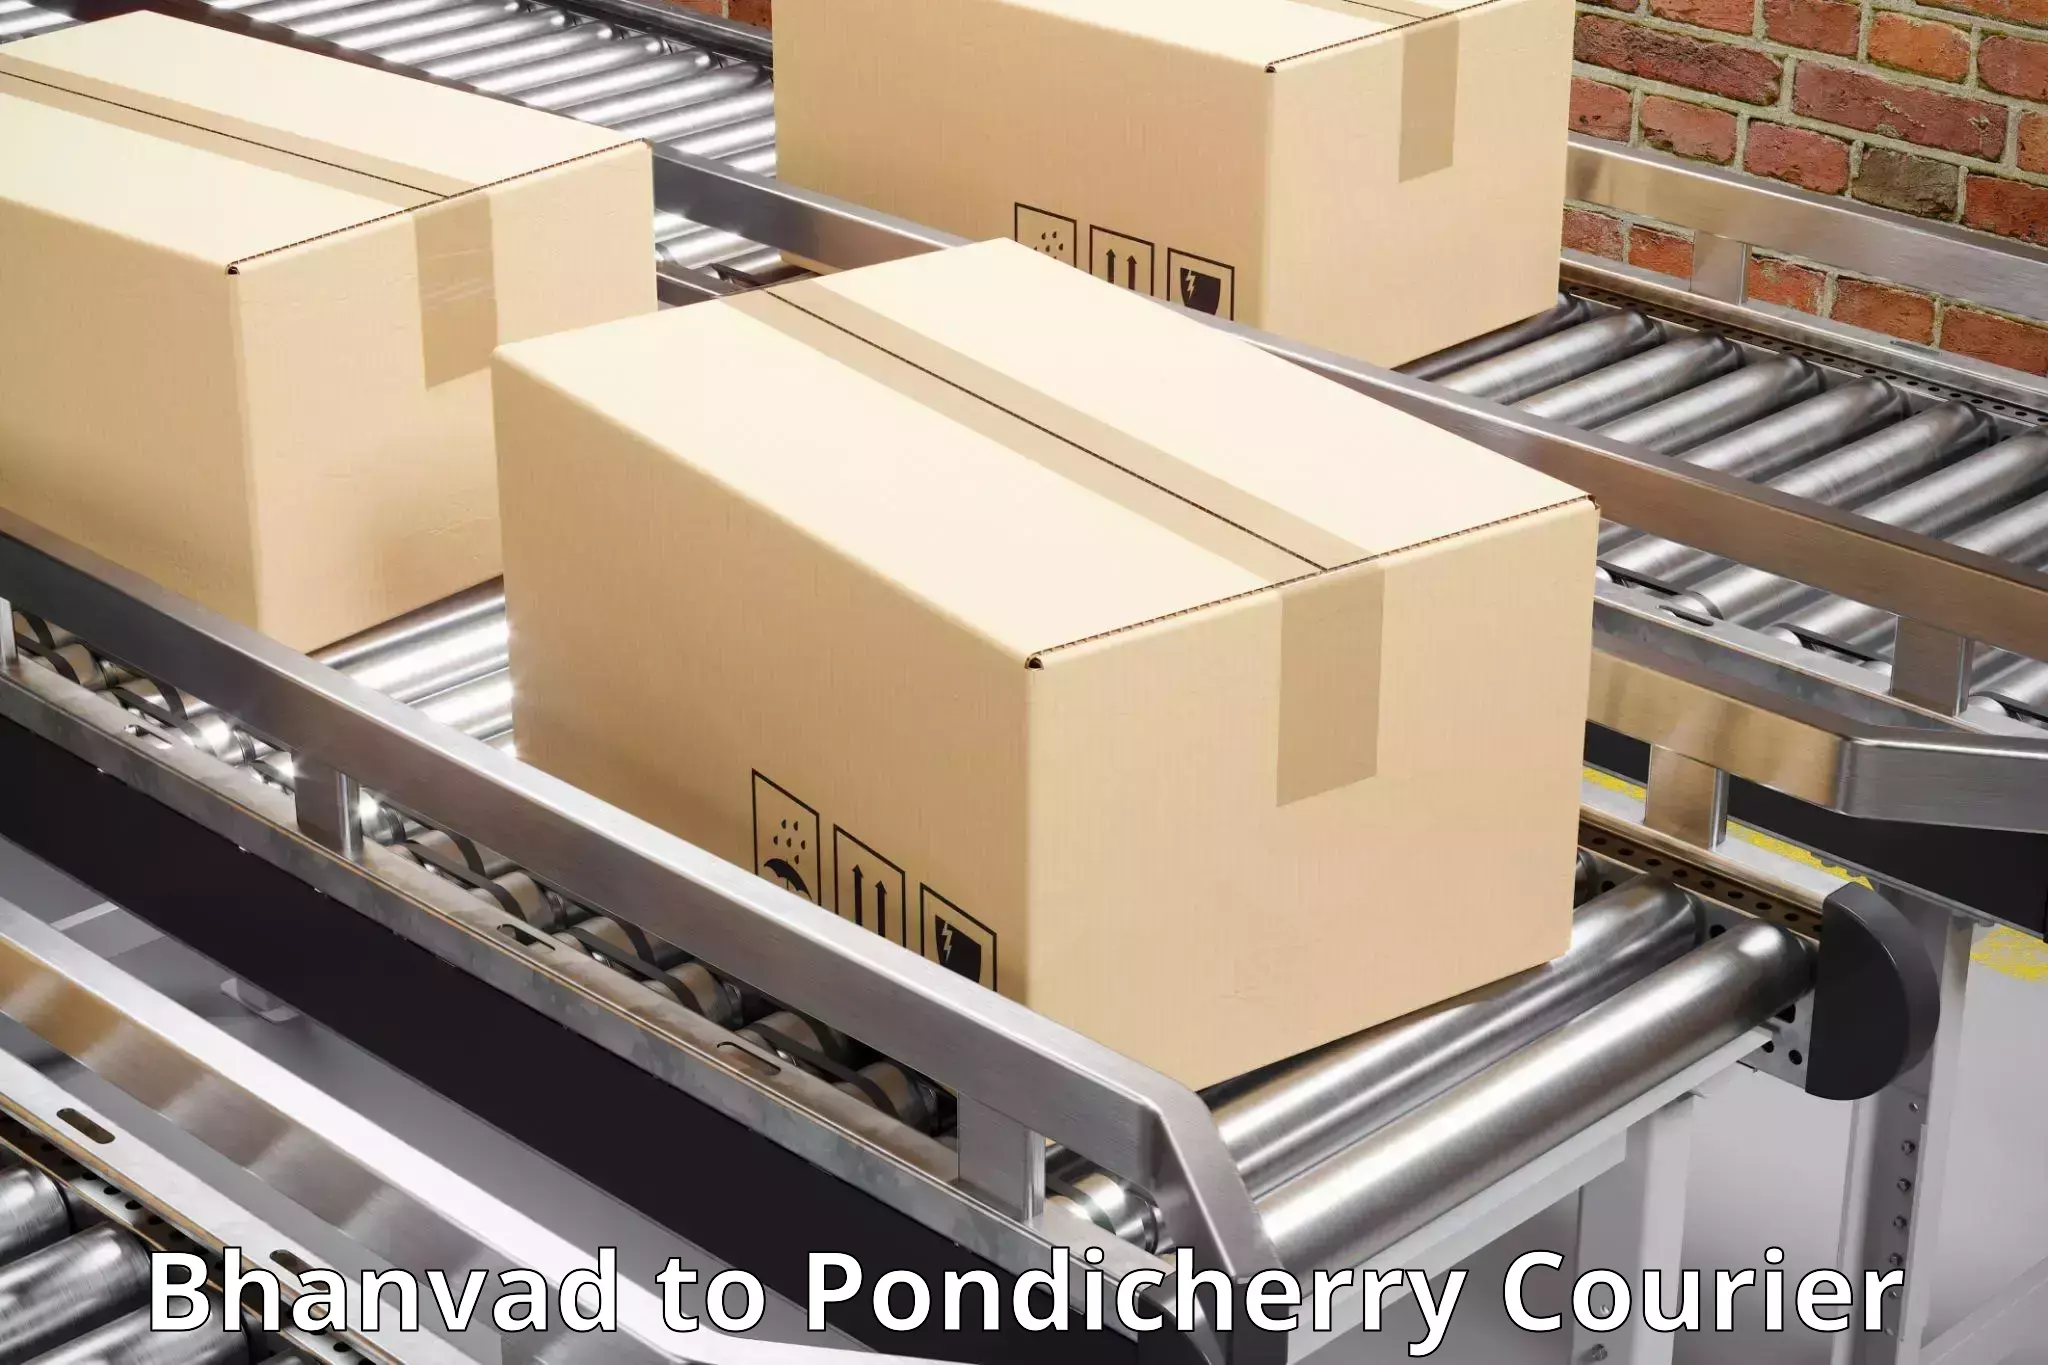 Online package tracking Bhanvad to Pondicherry University